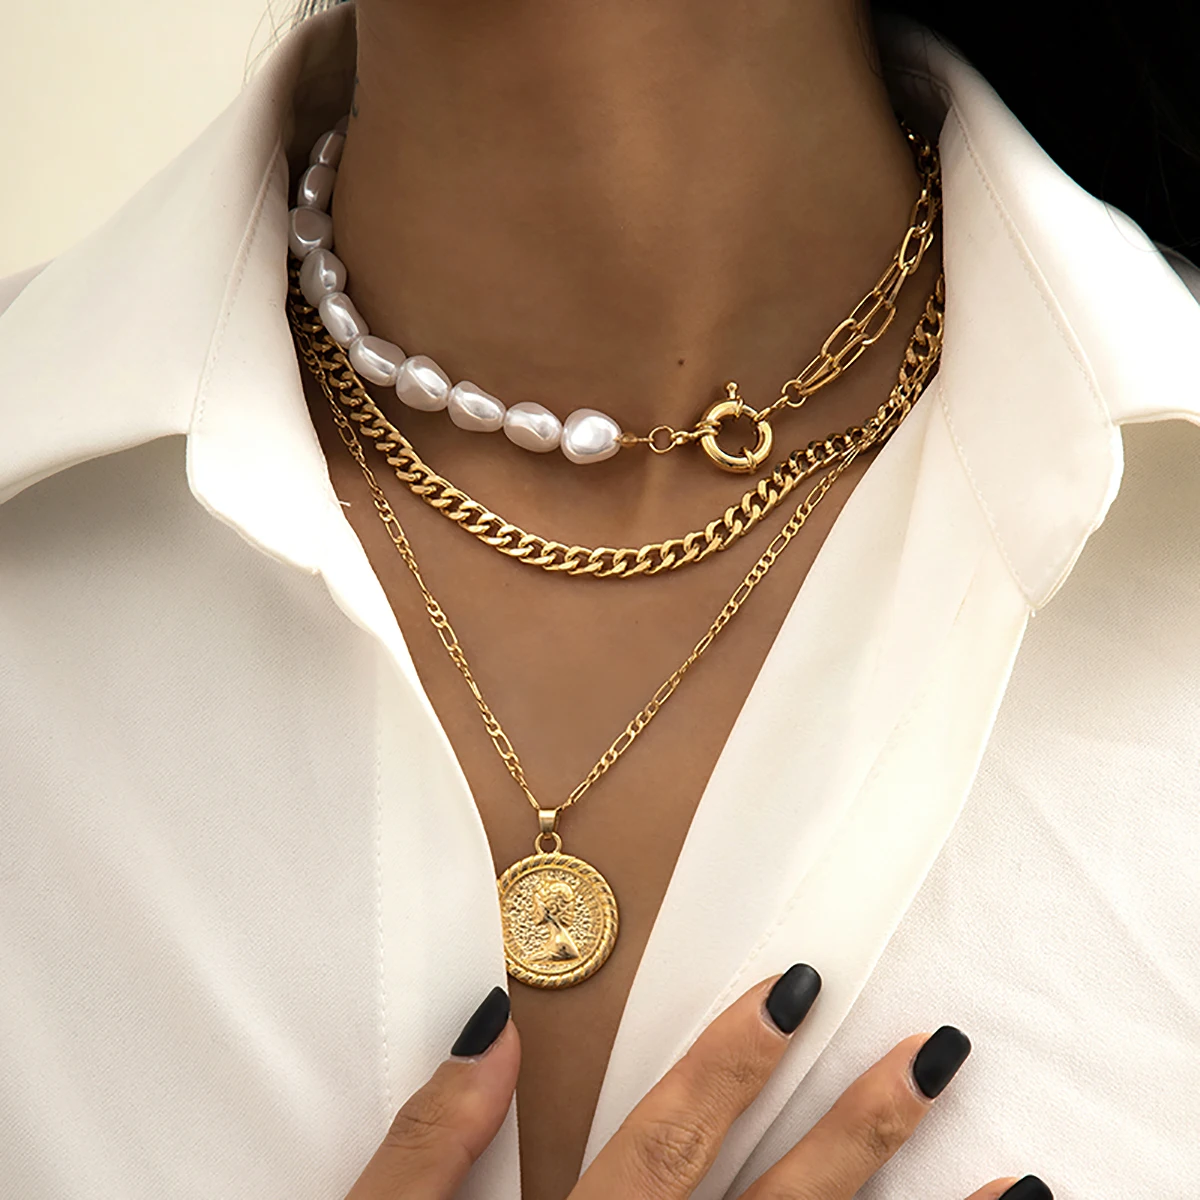 

SHIXIN Layered Pearl Choker Colar Thick Chains with Coin Pendant Necklace for Women Fashion Choker Necklace on Neck 2021 Jewelry